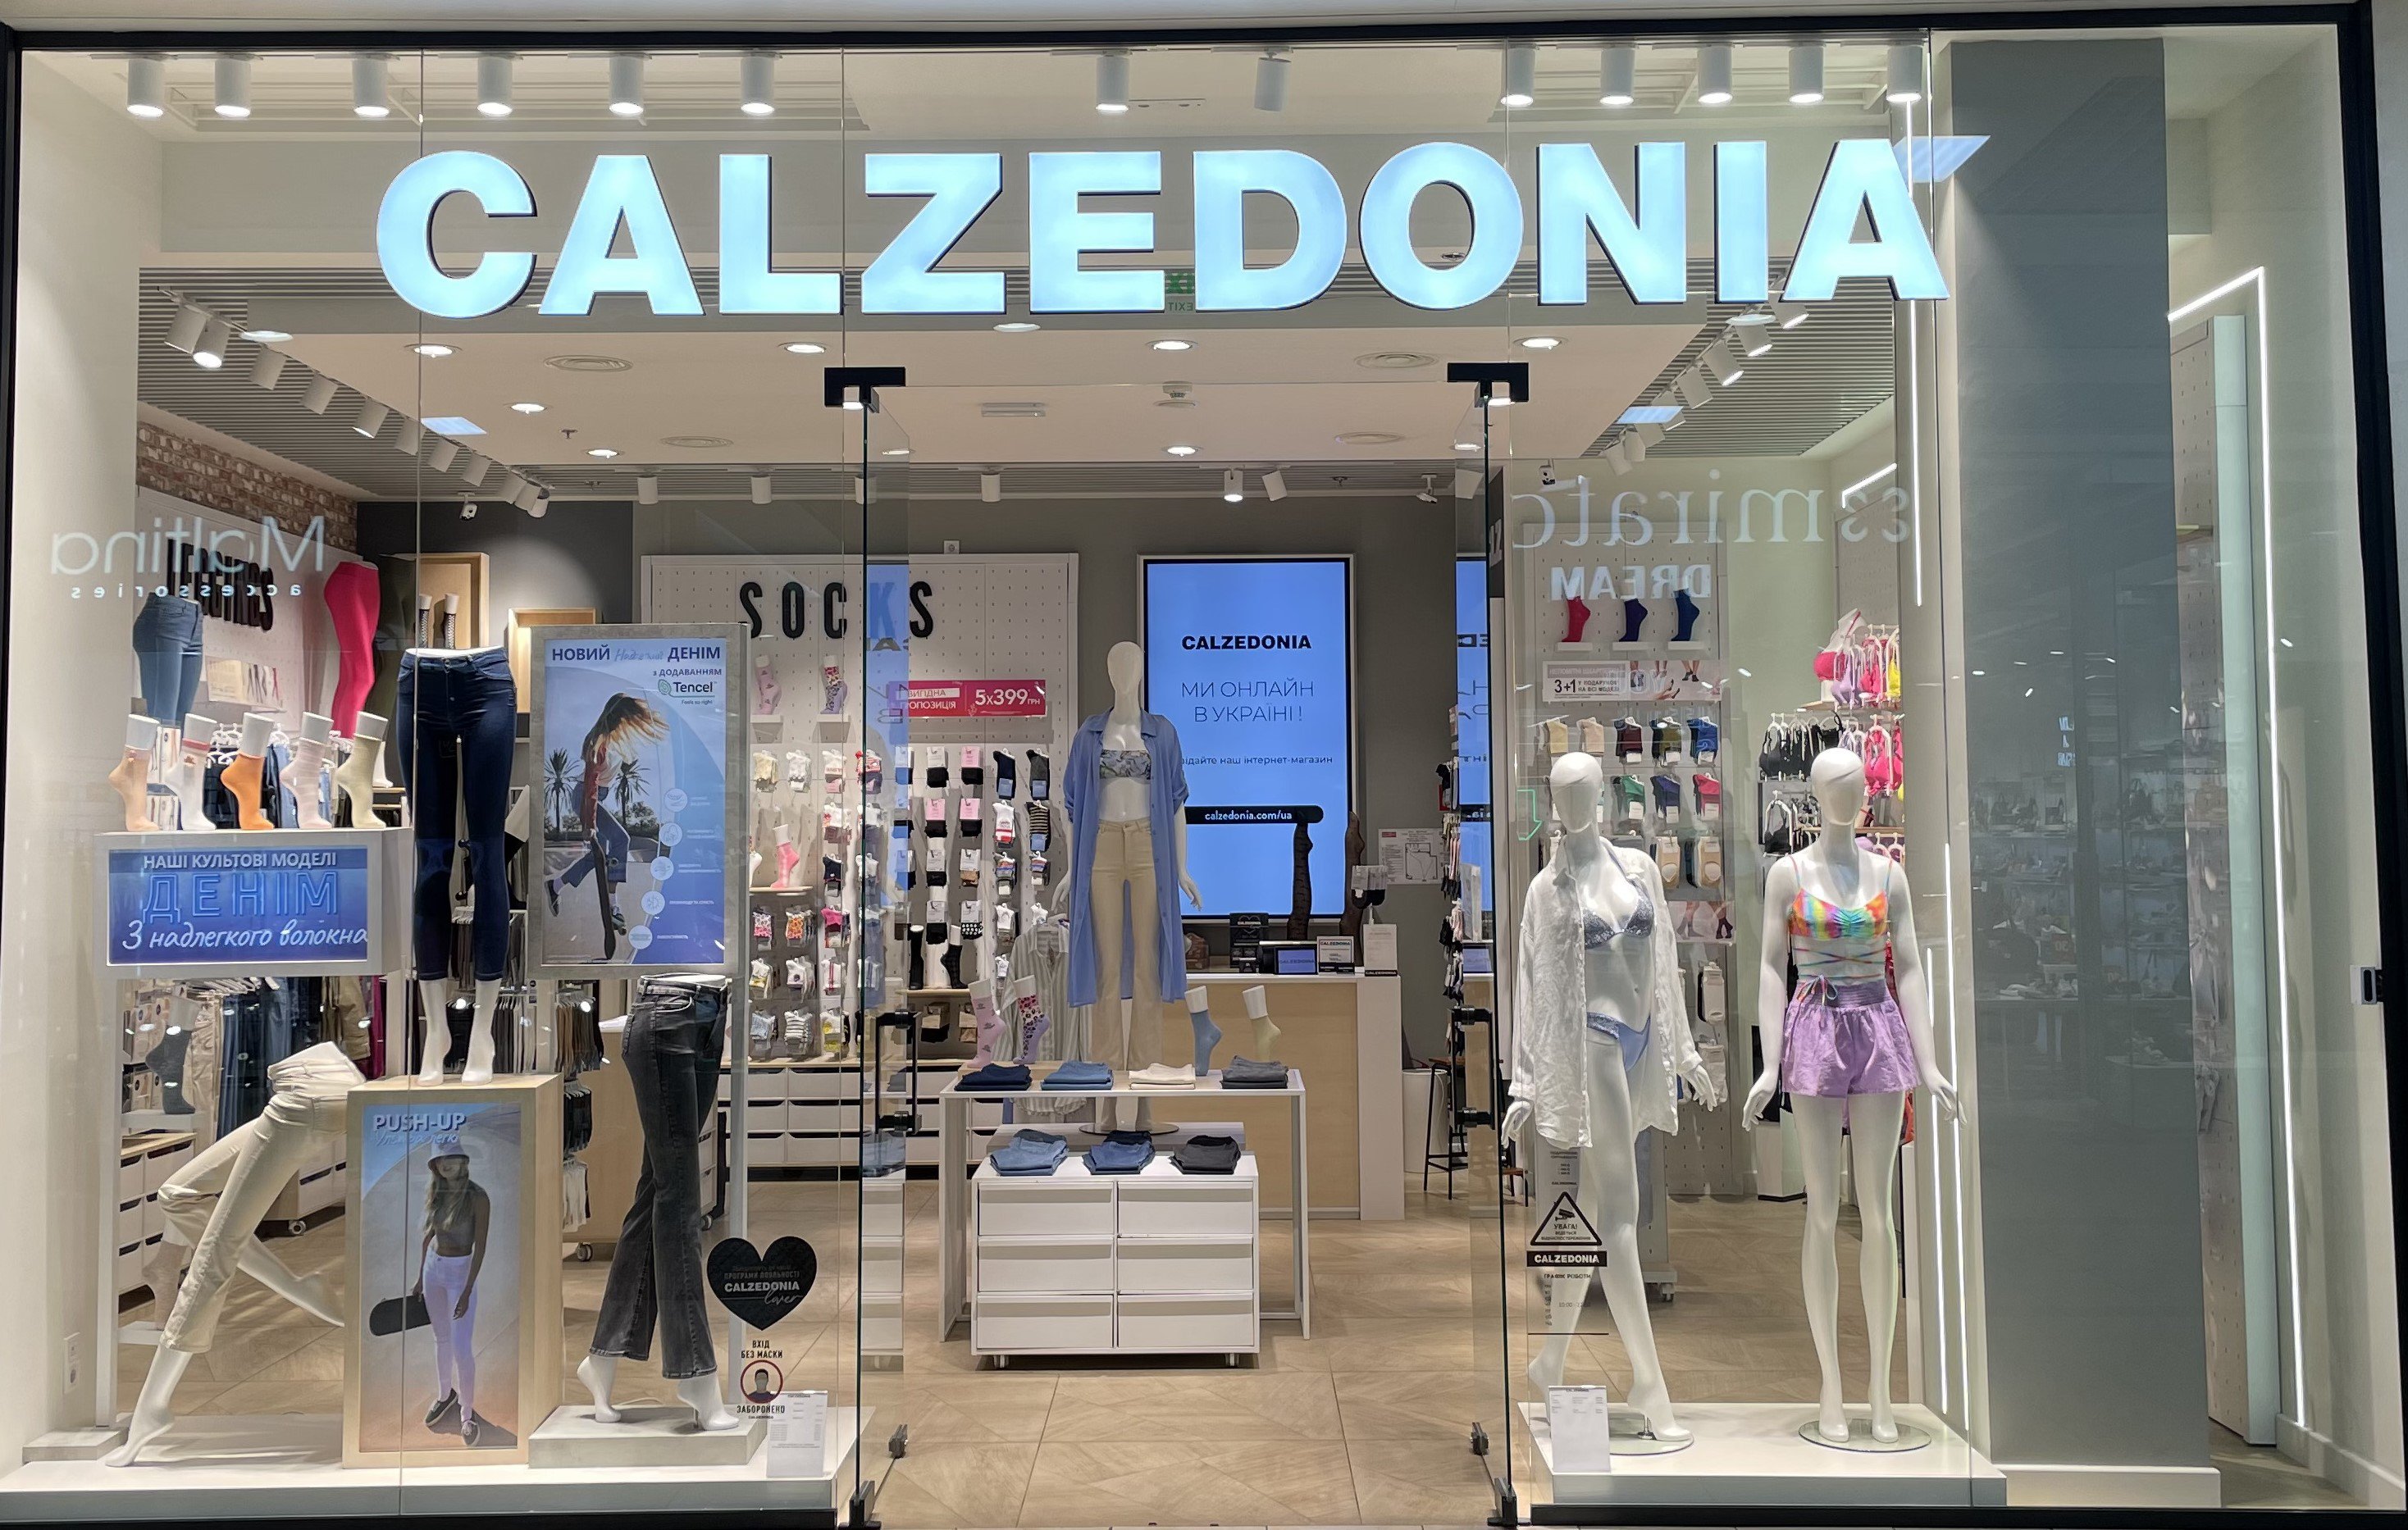 Calzedonia ТРЦ "Dream Town"